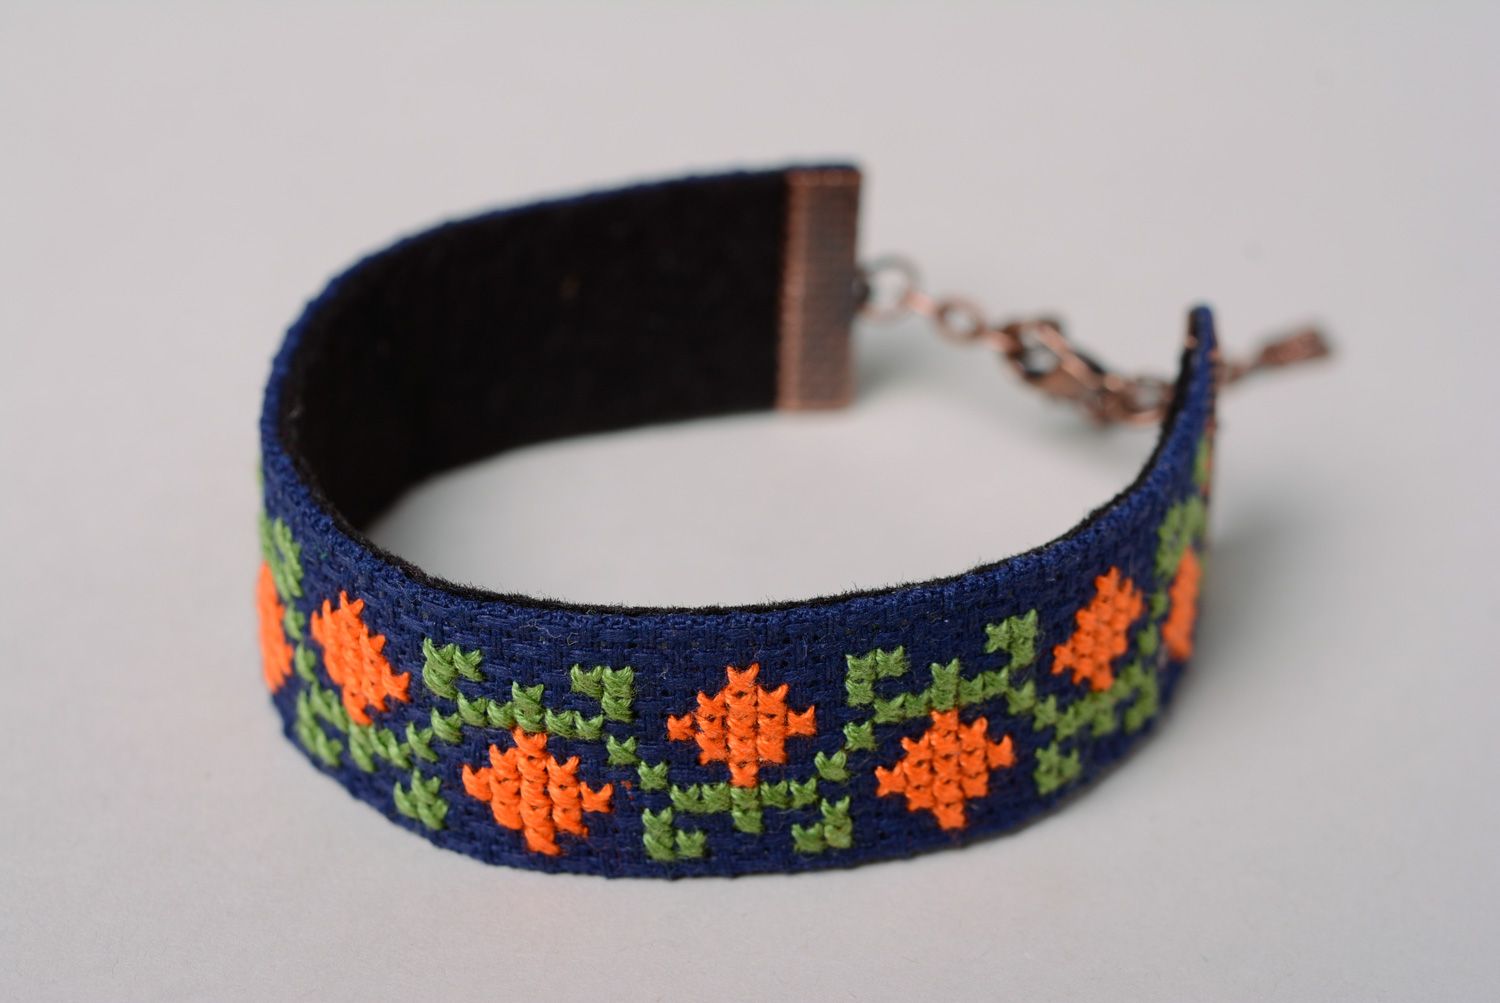 Handmade wrist bracelet with cross stitch embroidery on blue background for women photo 2